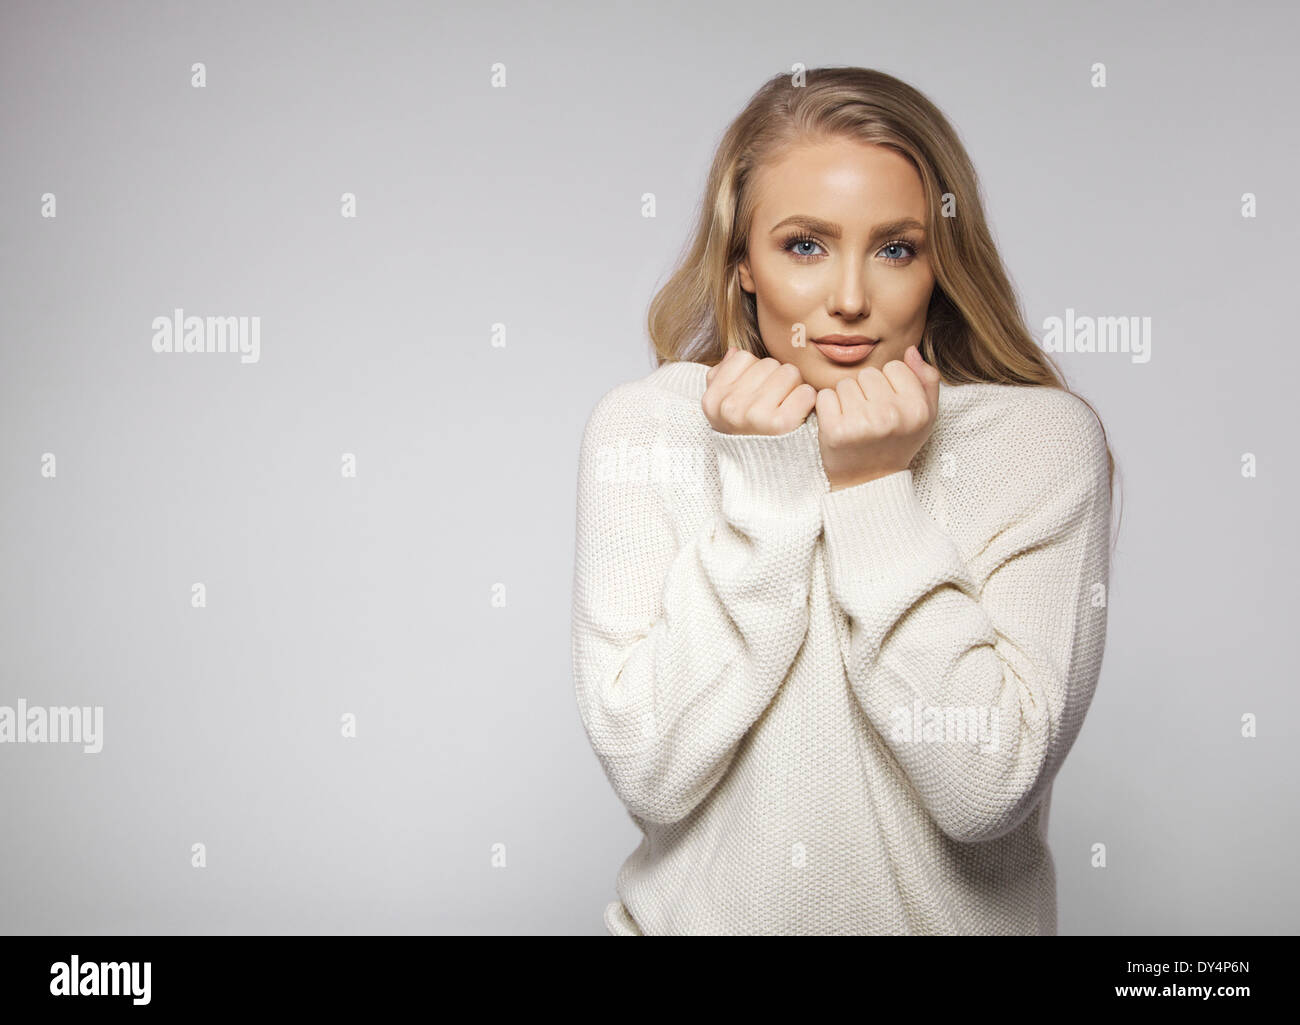 Portrait of beautiful young blond wearing sweater feeling cold. Cute young female fashion model posing on gray background. Stock Photo